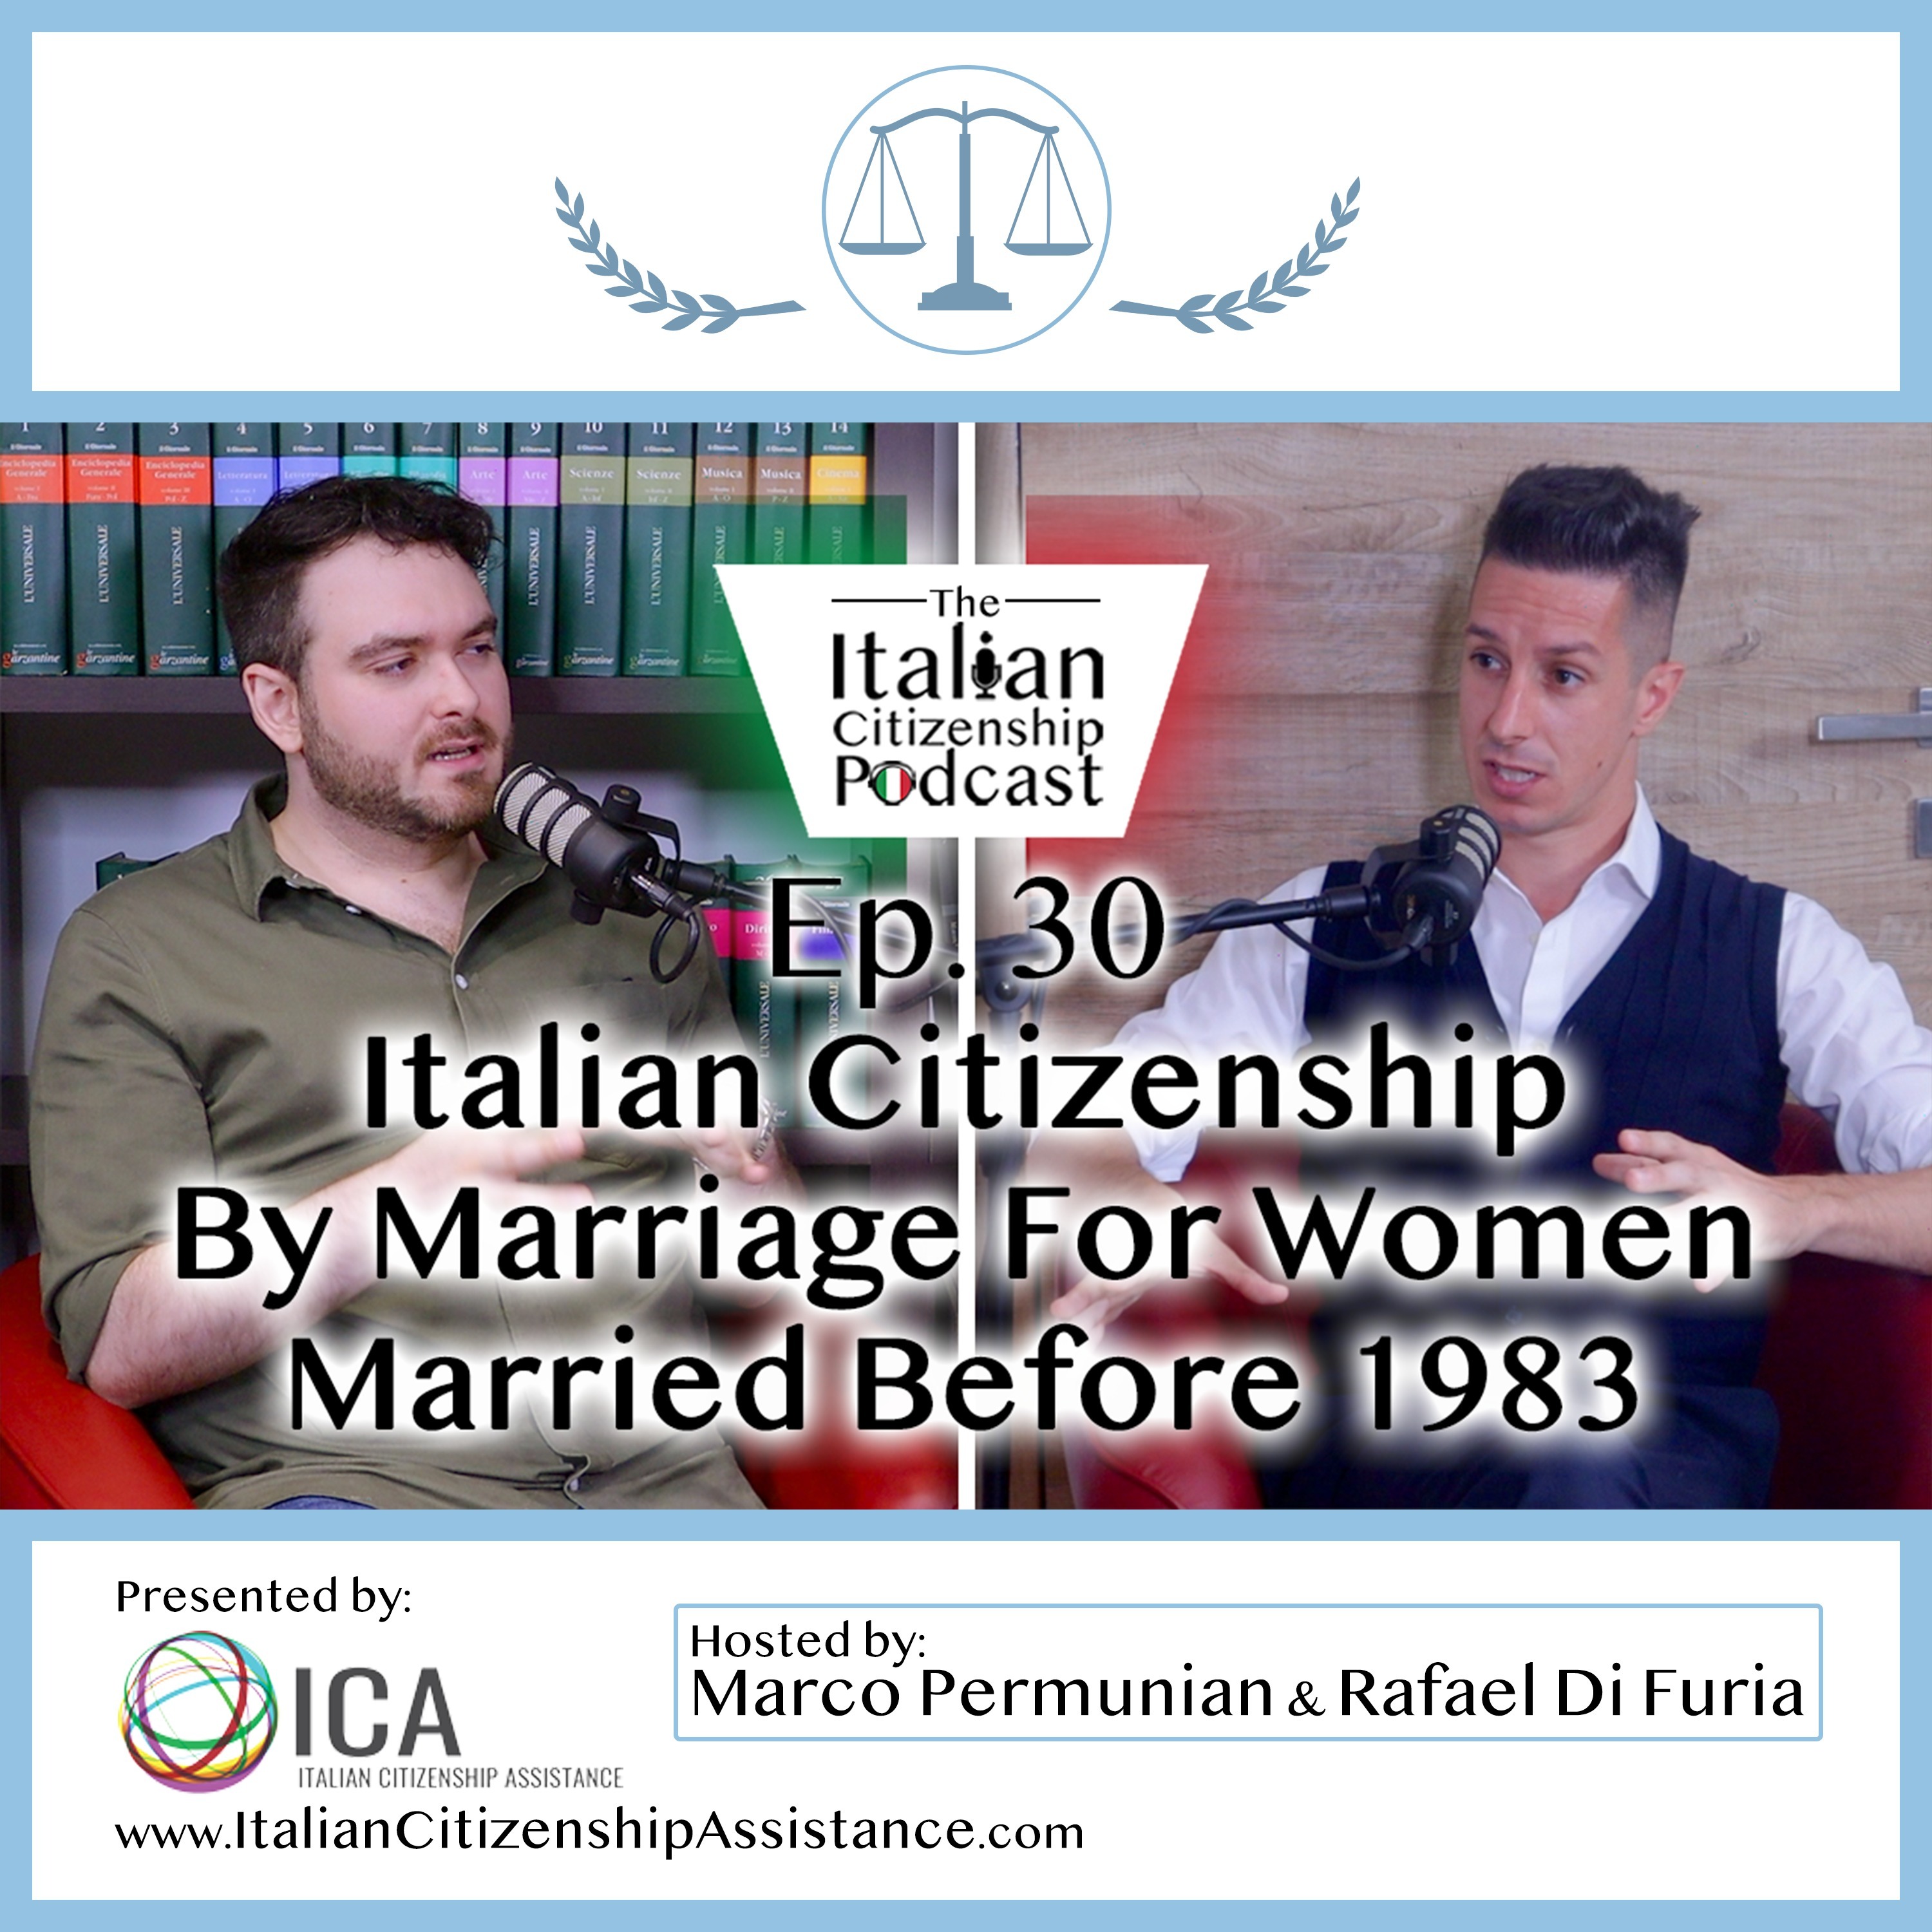 Italian Citizenship by Marriage For Women Married Before 1983